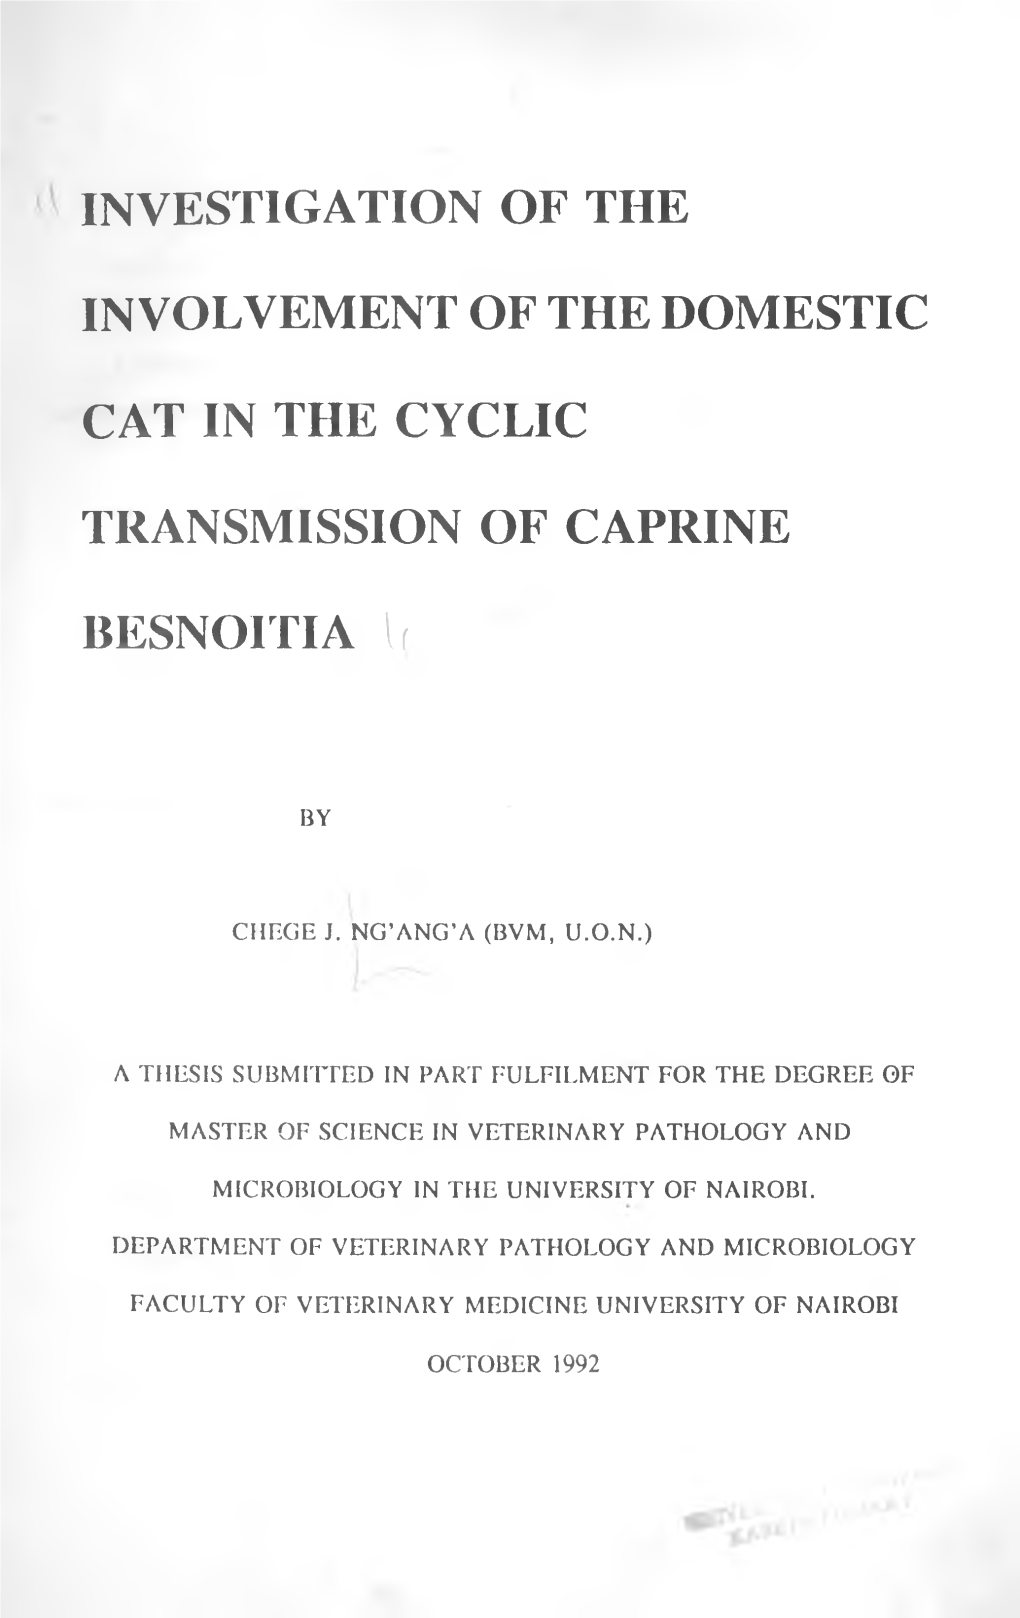 Investigation of the Involvement of the Domestic Cat in the Cyclic